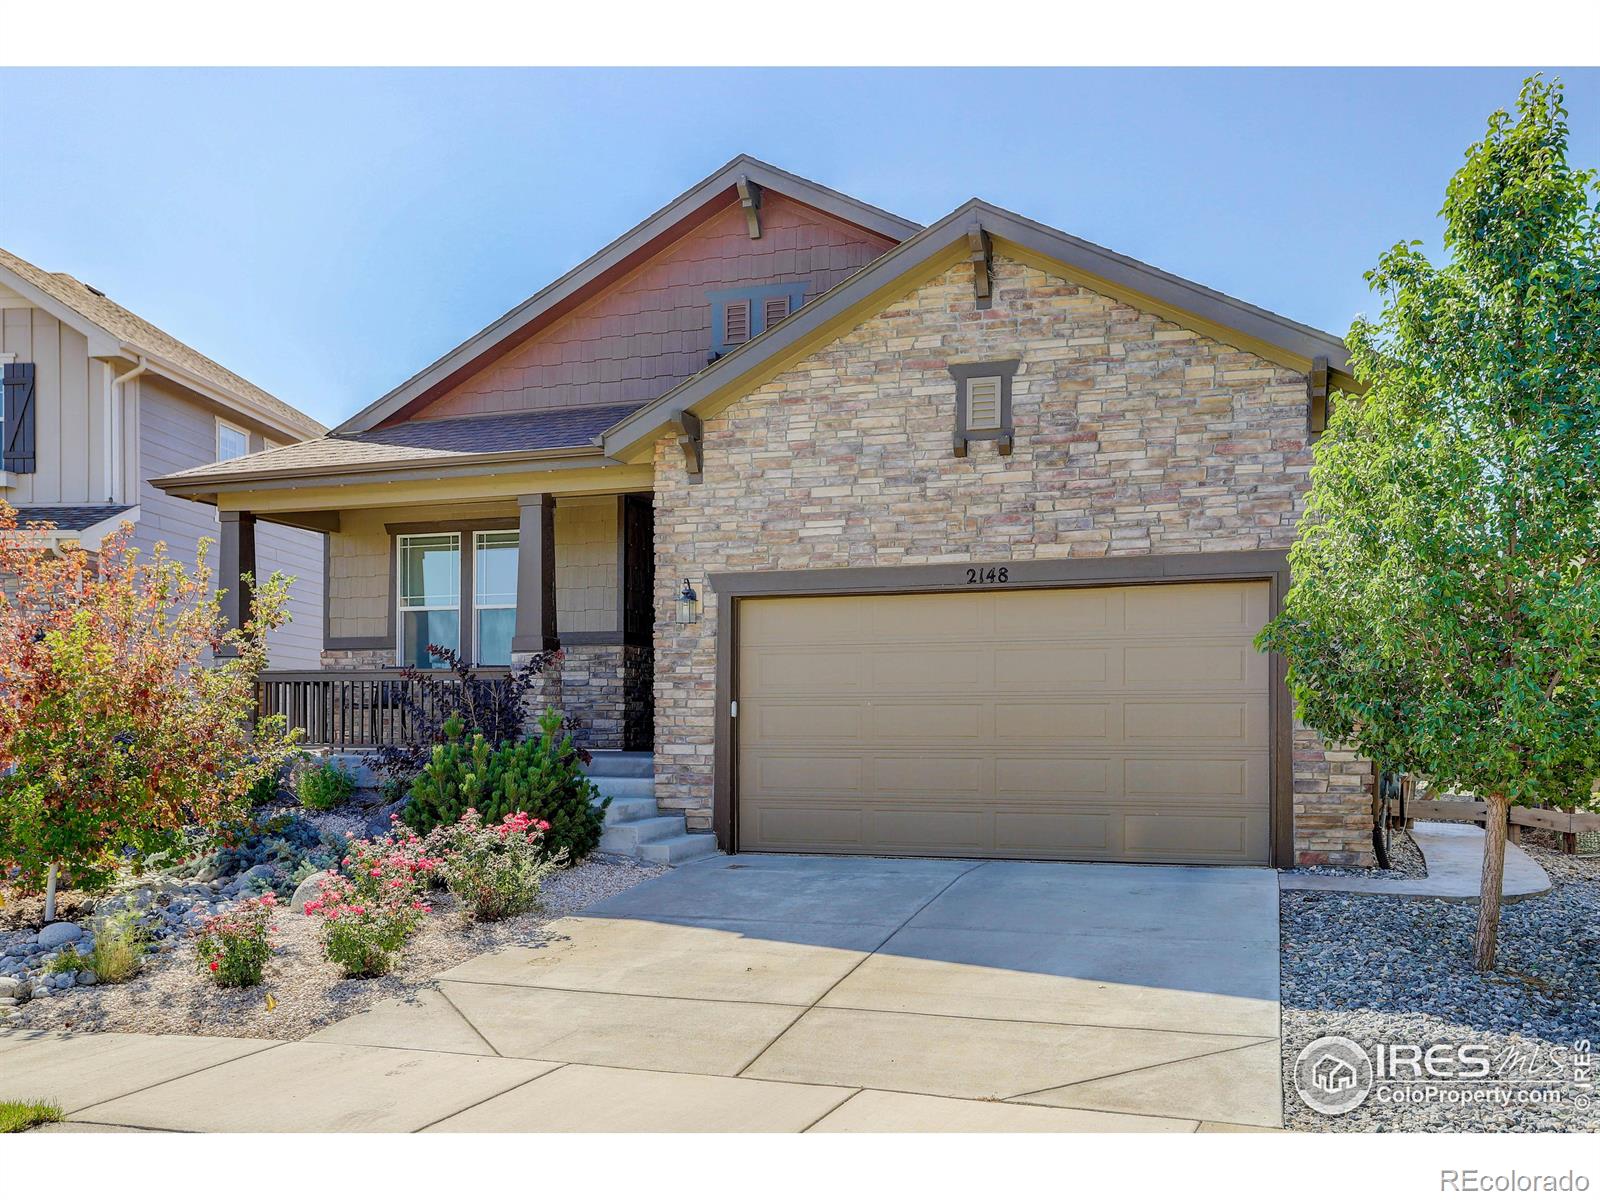 Report Image for 2148  Lombardy Street,Longmont, Colorado